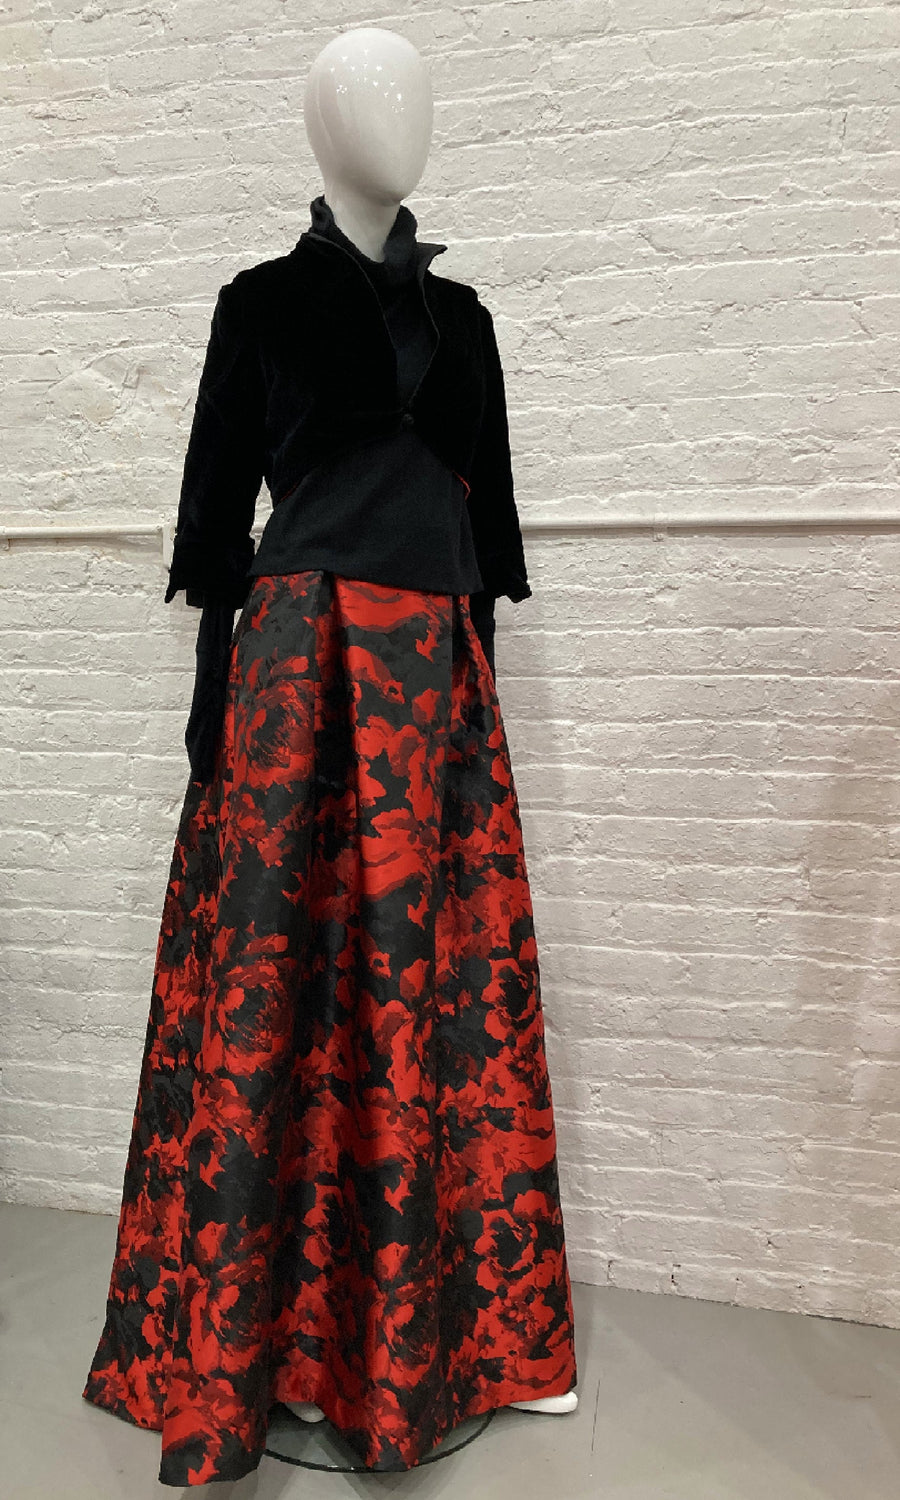 Abstract Rose Ball Gown Skirt, size Small